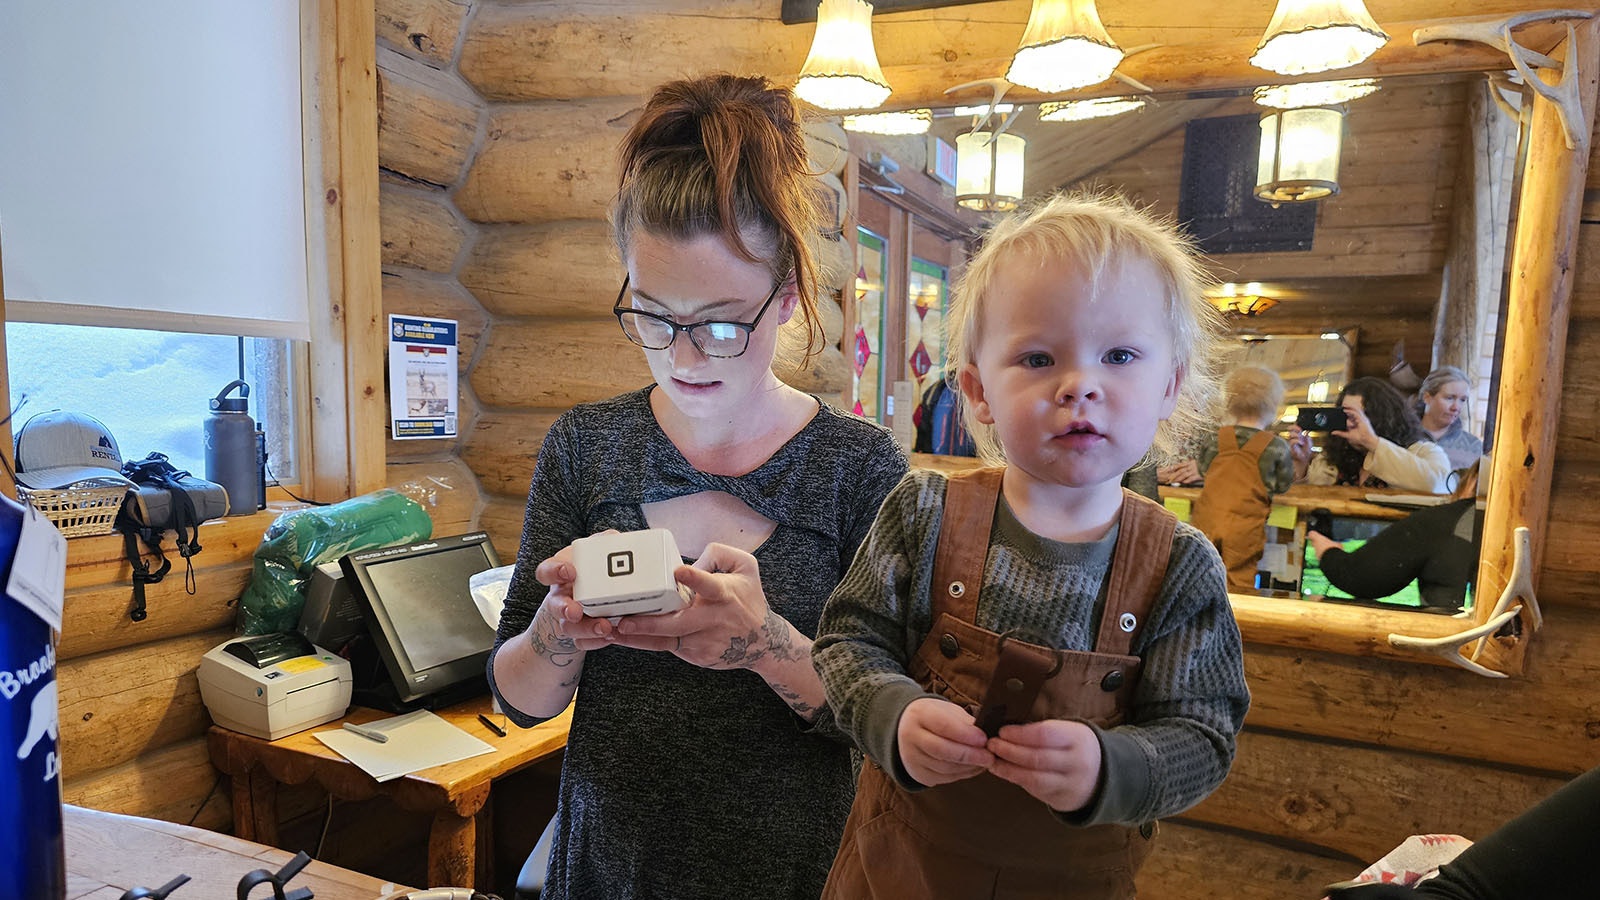 Aspen Conner pauses to look up for a moment from looking at the souvenirs a guest is buying from Brooks Lake Lodge while her mother, Victoria, processes a transaction.